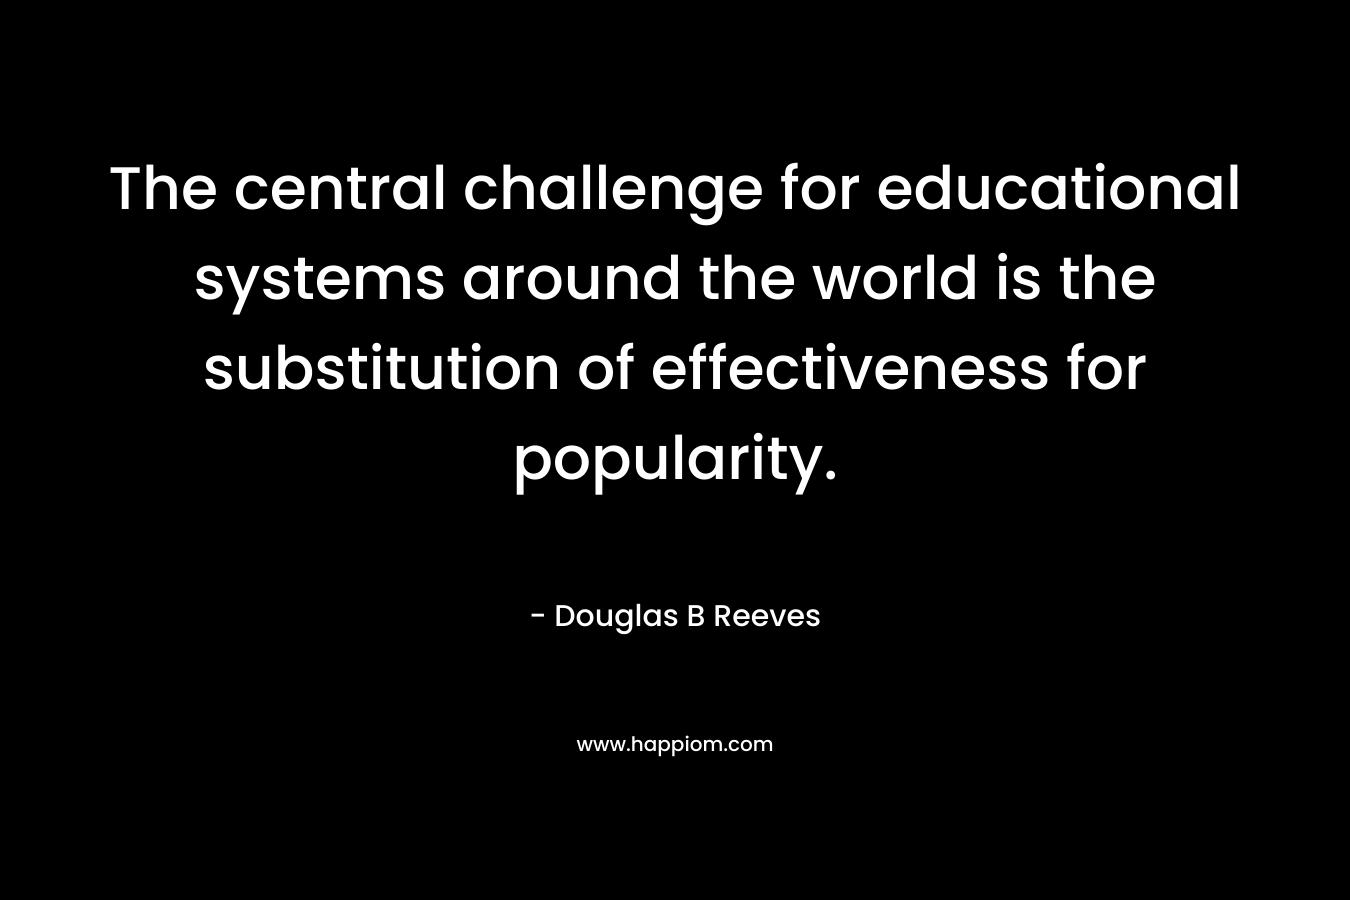 The central challenge for educational systems around the world is the substitution of effectiveness for popularity.